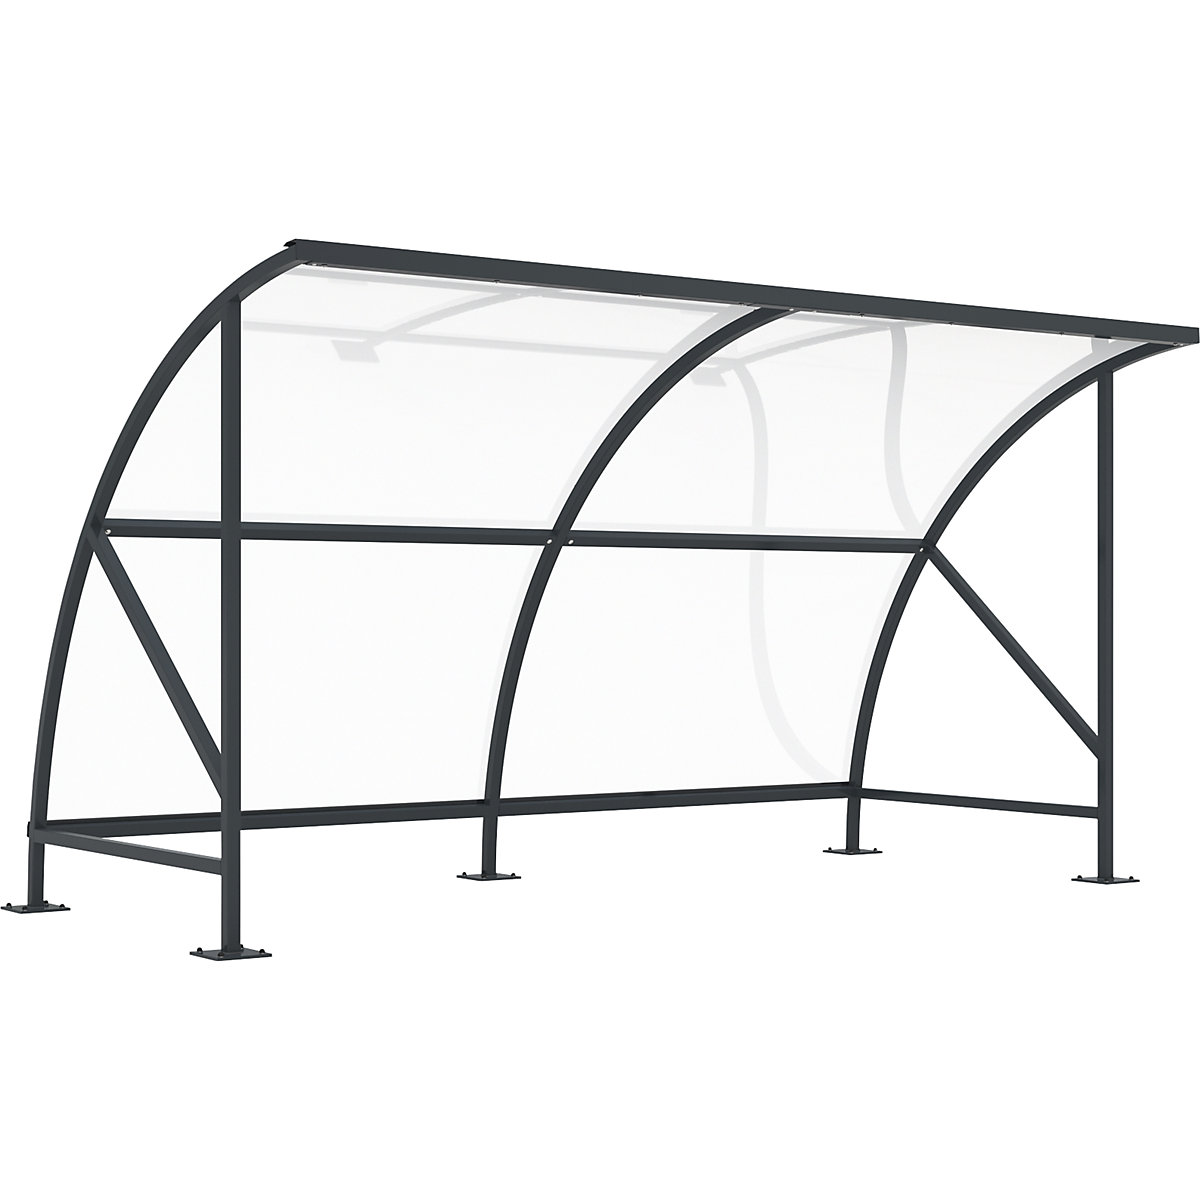 Bicycle shelter, made of polycarbonate, WxD 4130 x 2100 mm, charcoal RAL 7016-3